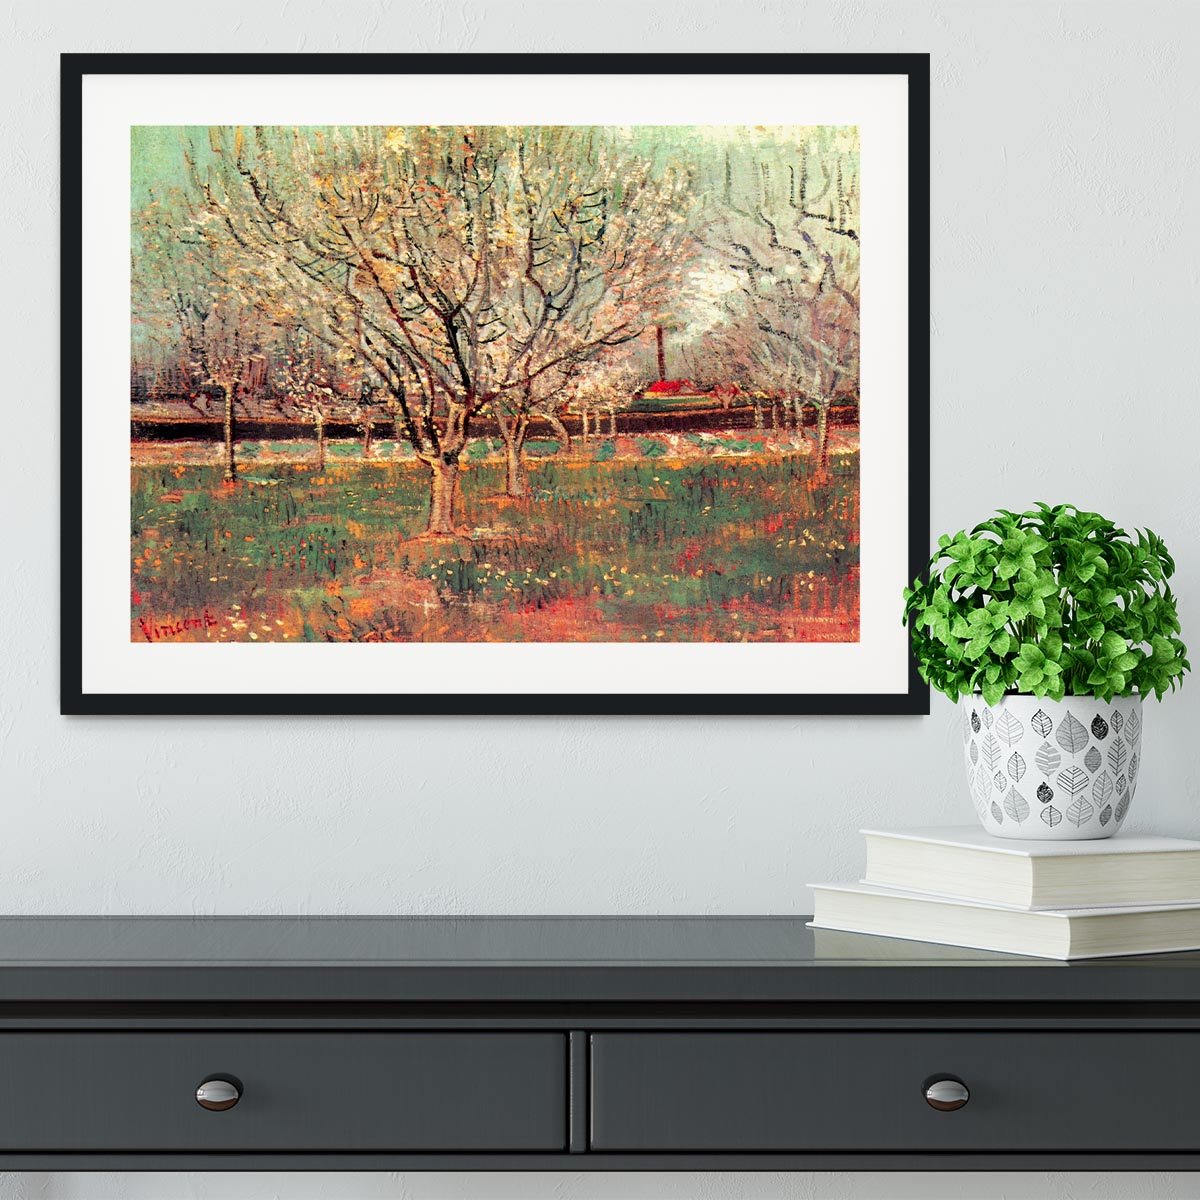 Orchard in Blossom Plum Trees by Van Gogh Framed Print - Canvas Art Rocks - 1